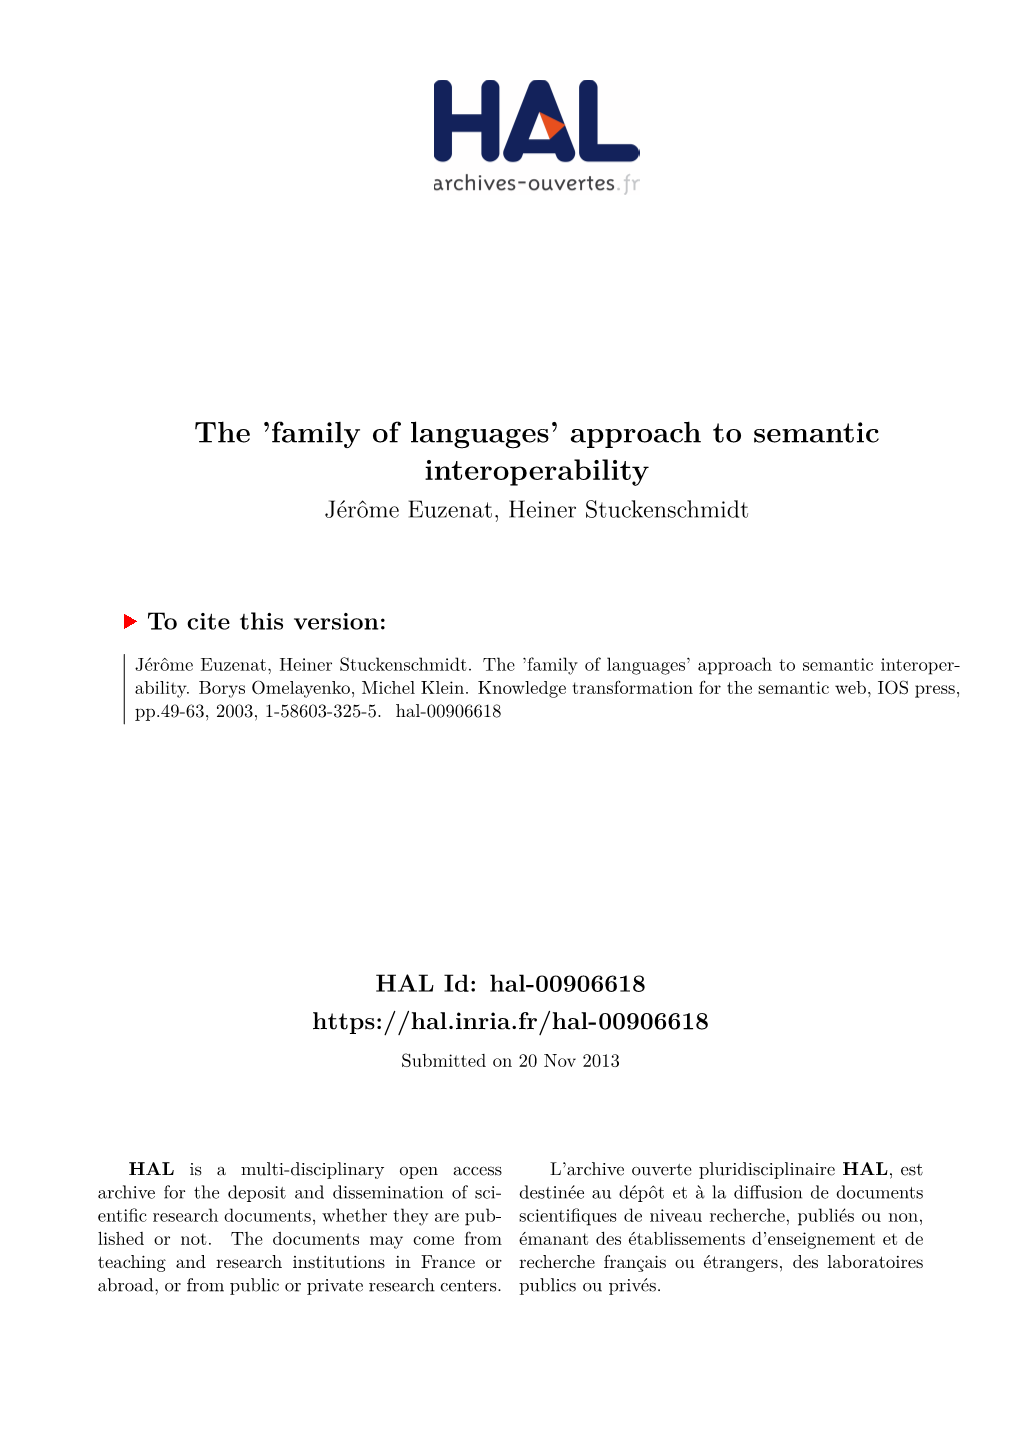 The 'Family of Languages' Approach to Semantic Interoperability